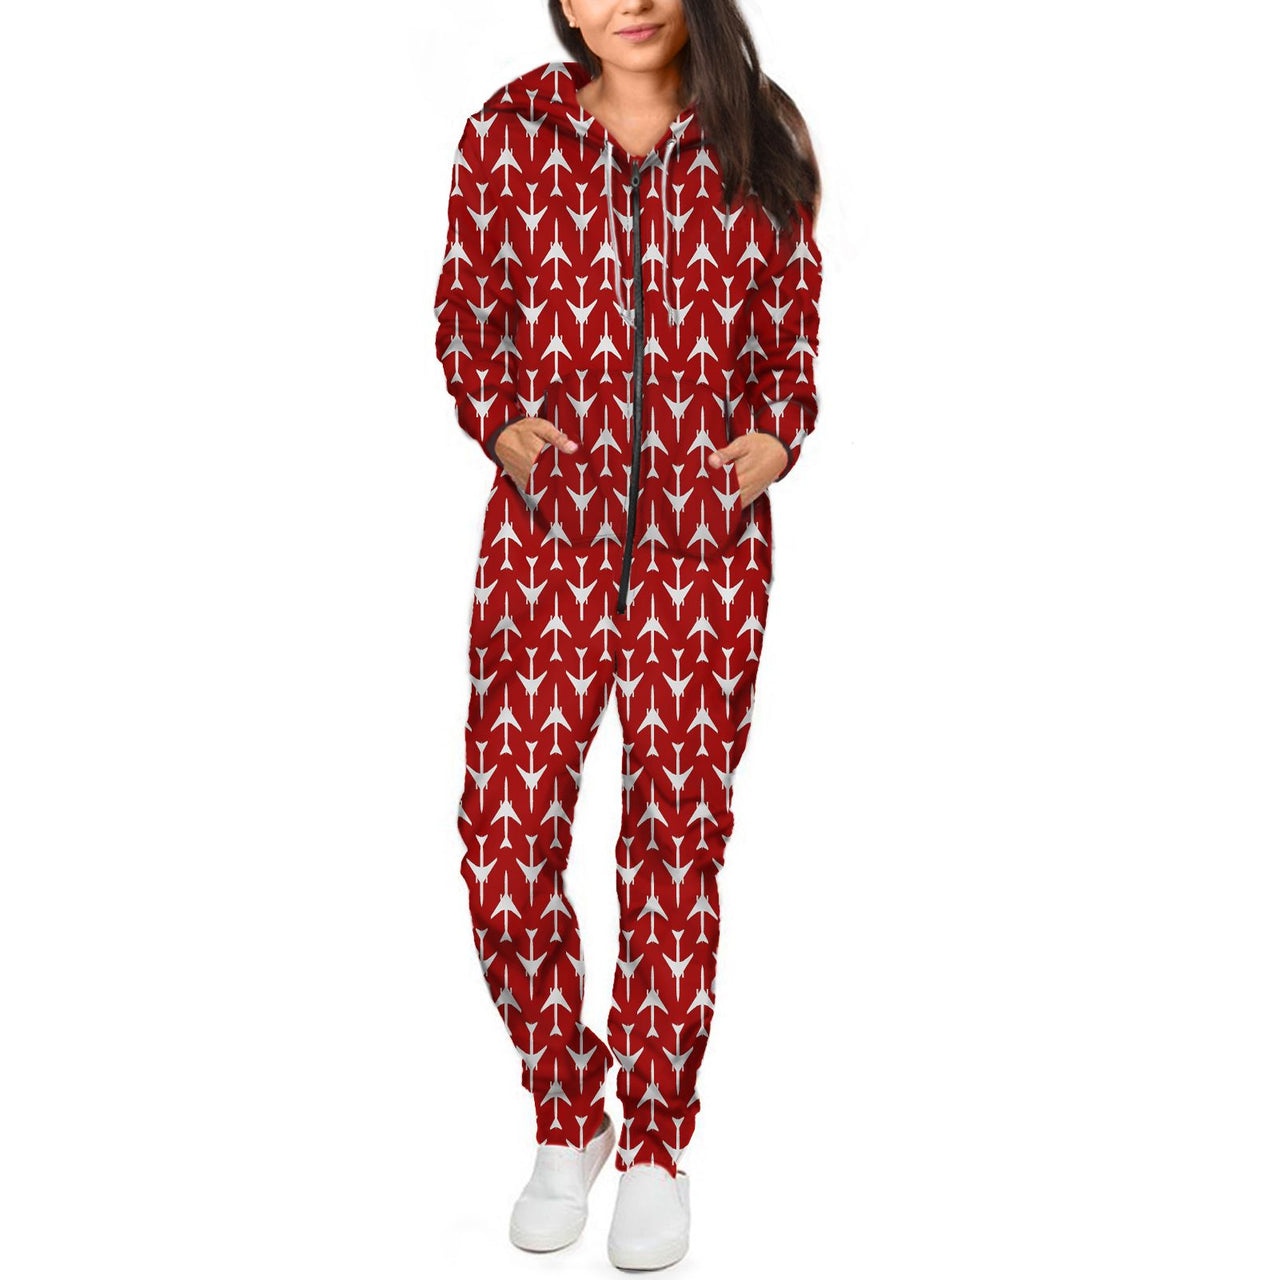 Perfectly Sized Seamless Airplanes Red Designed Jumpsuit for Men & Women